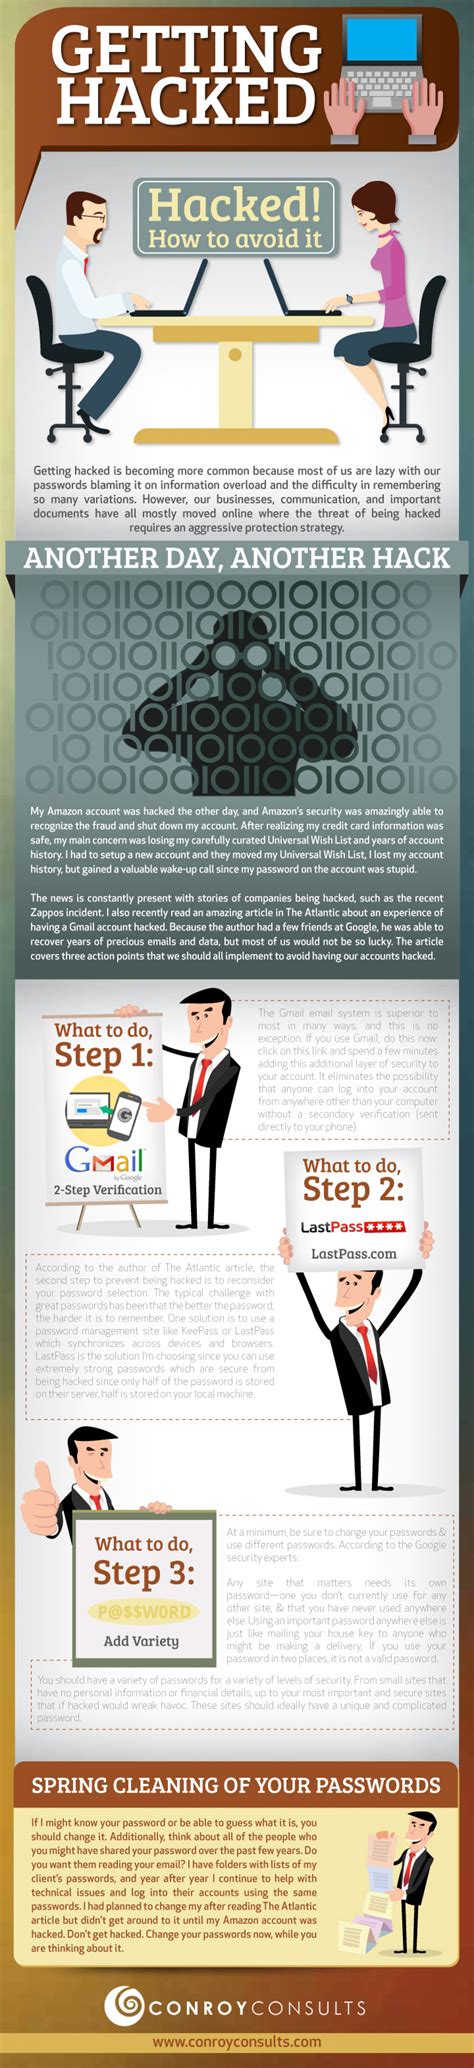 getting hacked infographic by conroy consults for law firm website visual ly